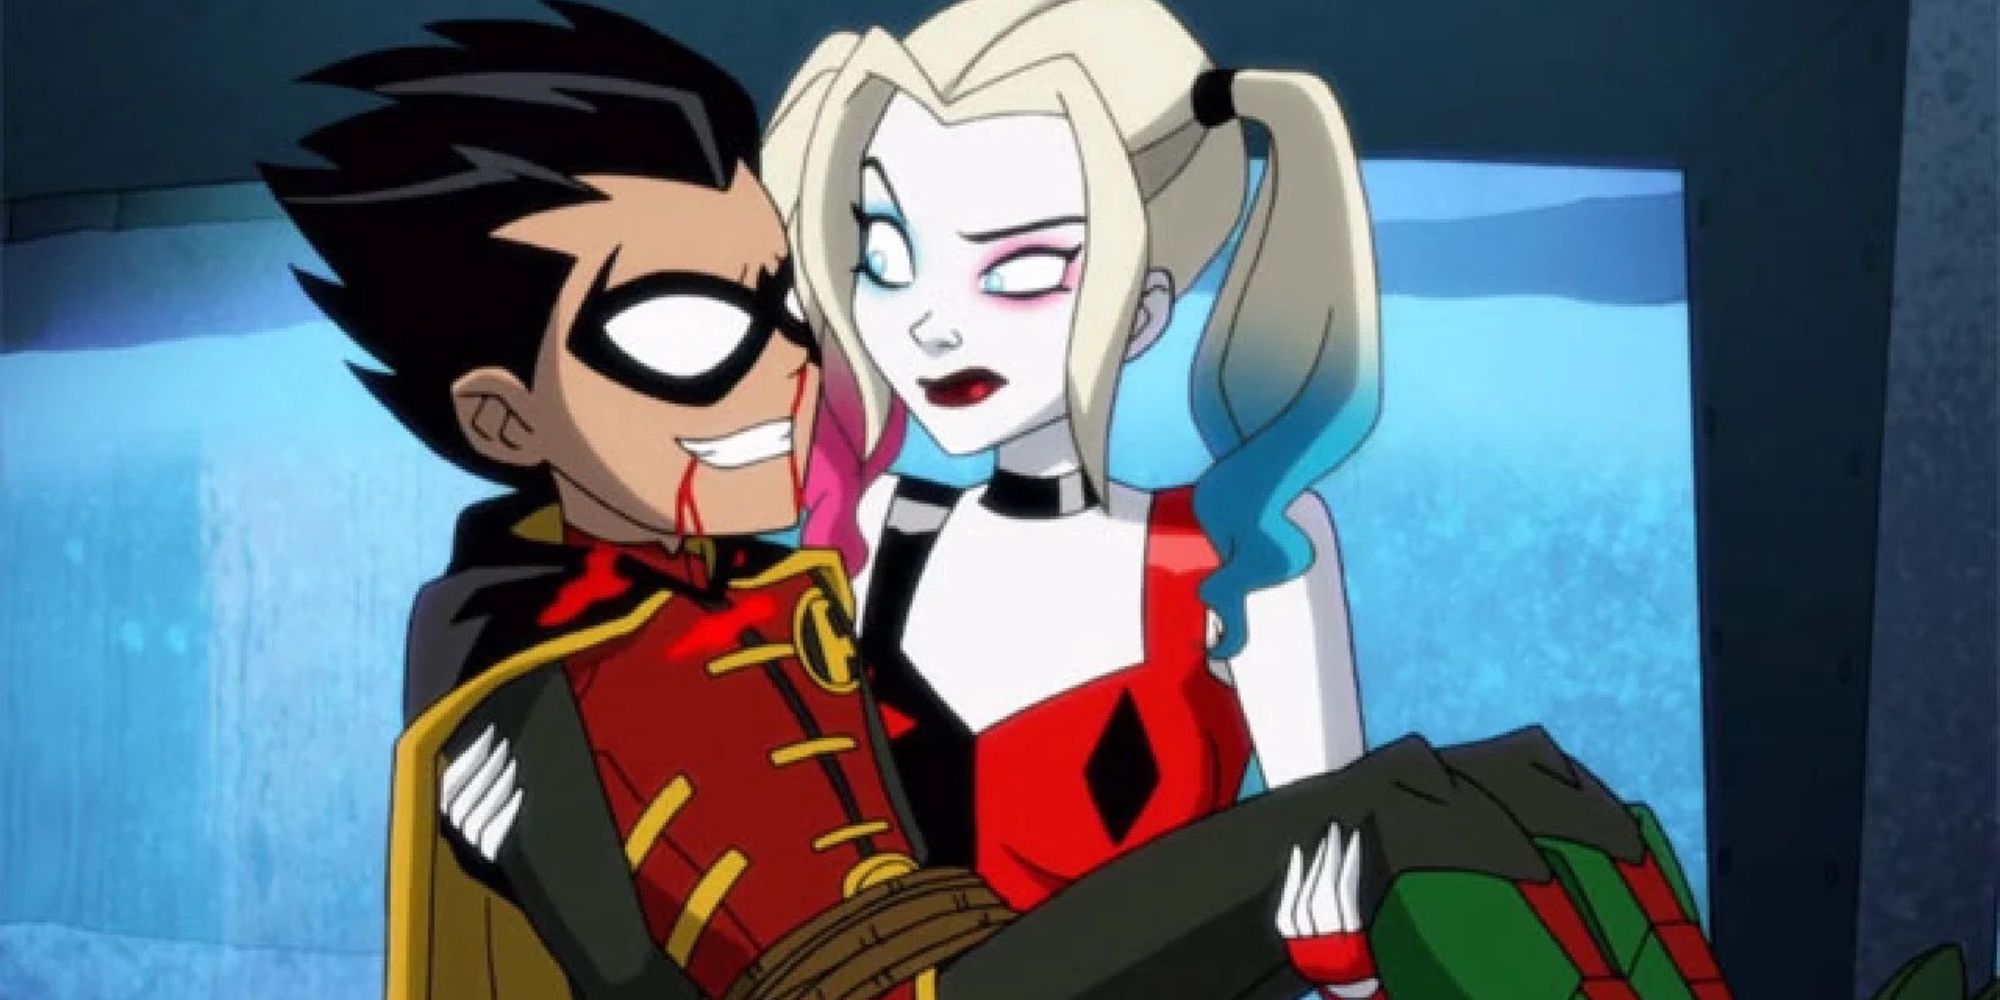 Harley carrying a bloodied Damian in Harley Quinn.